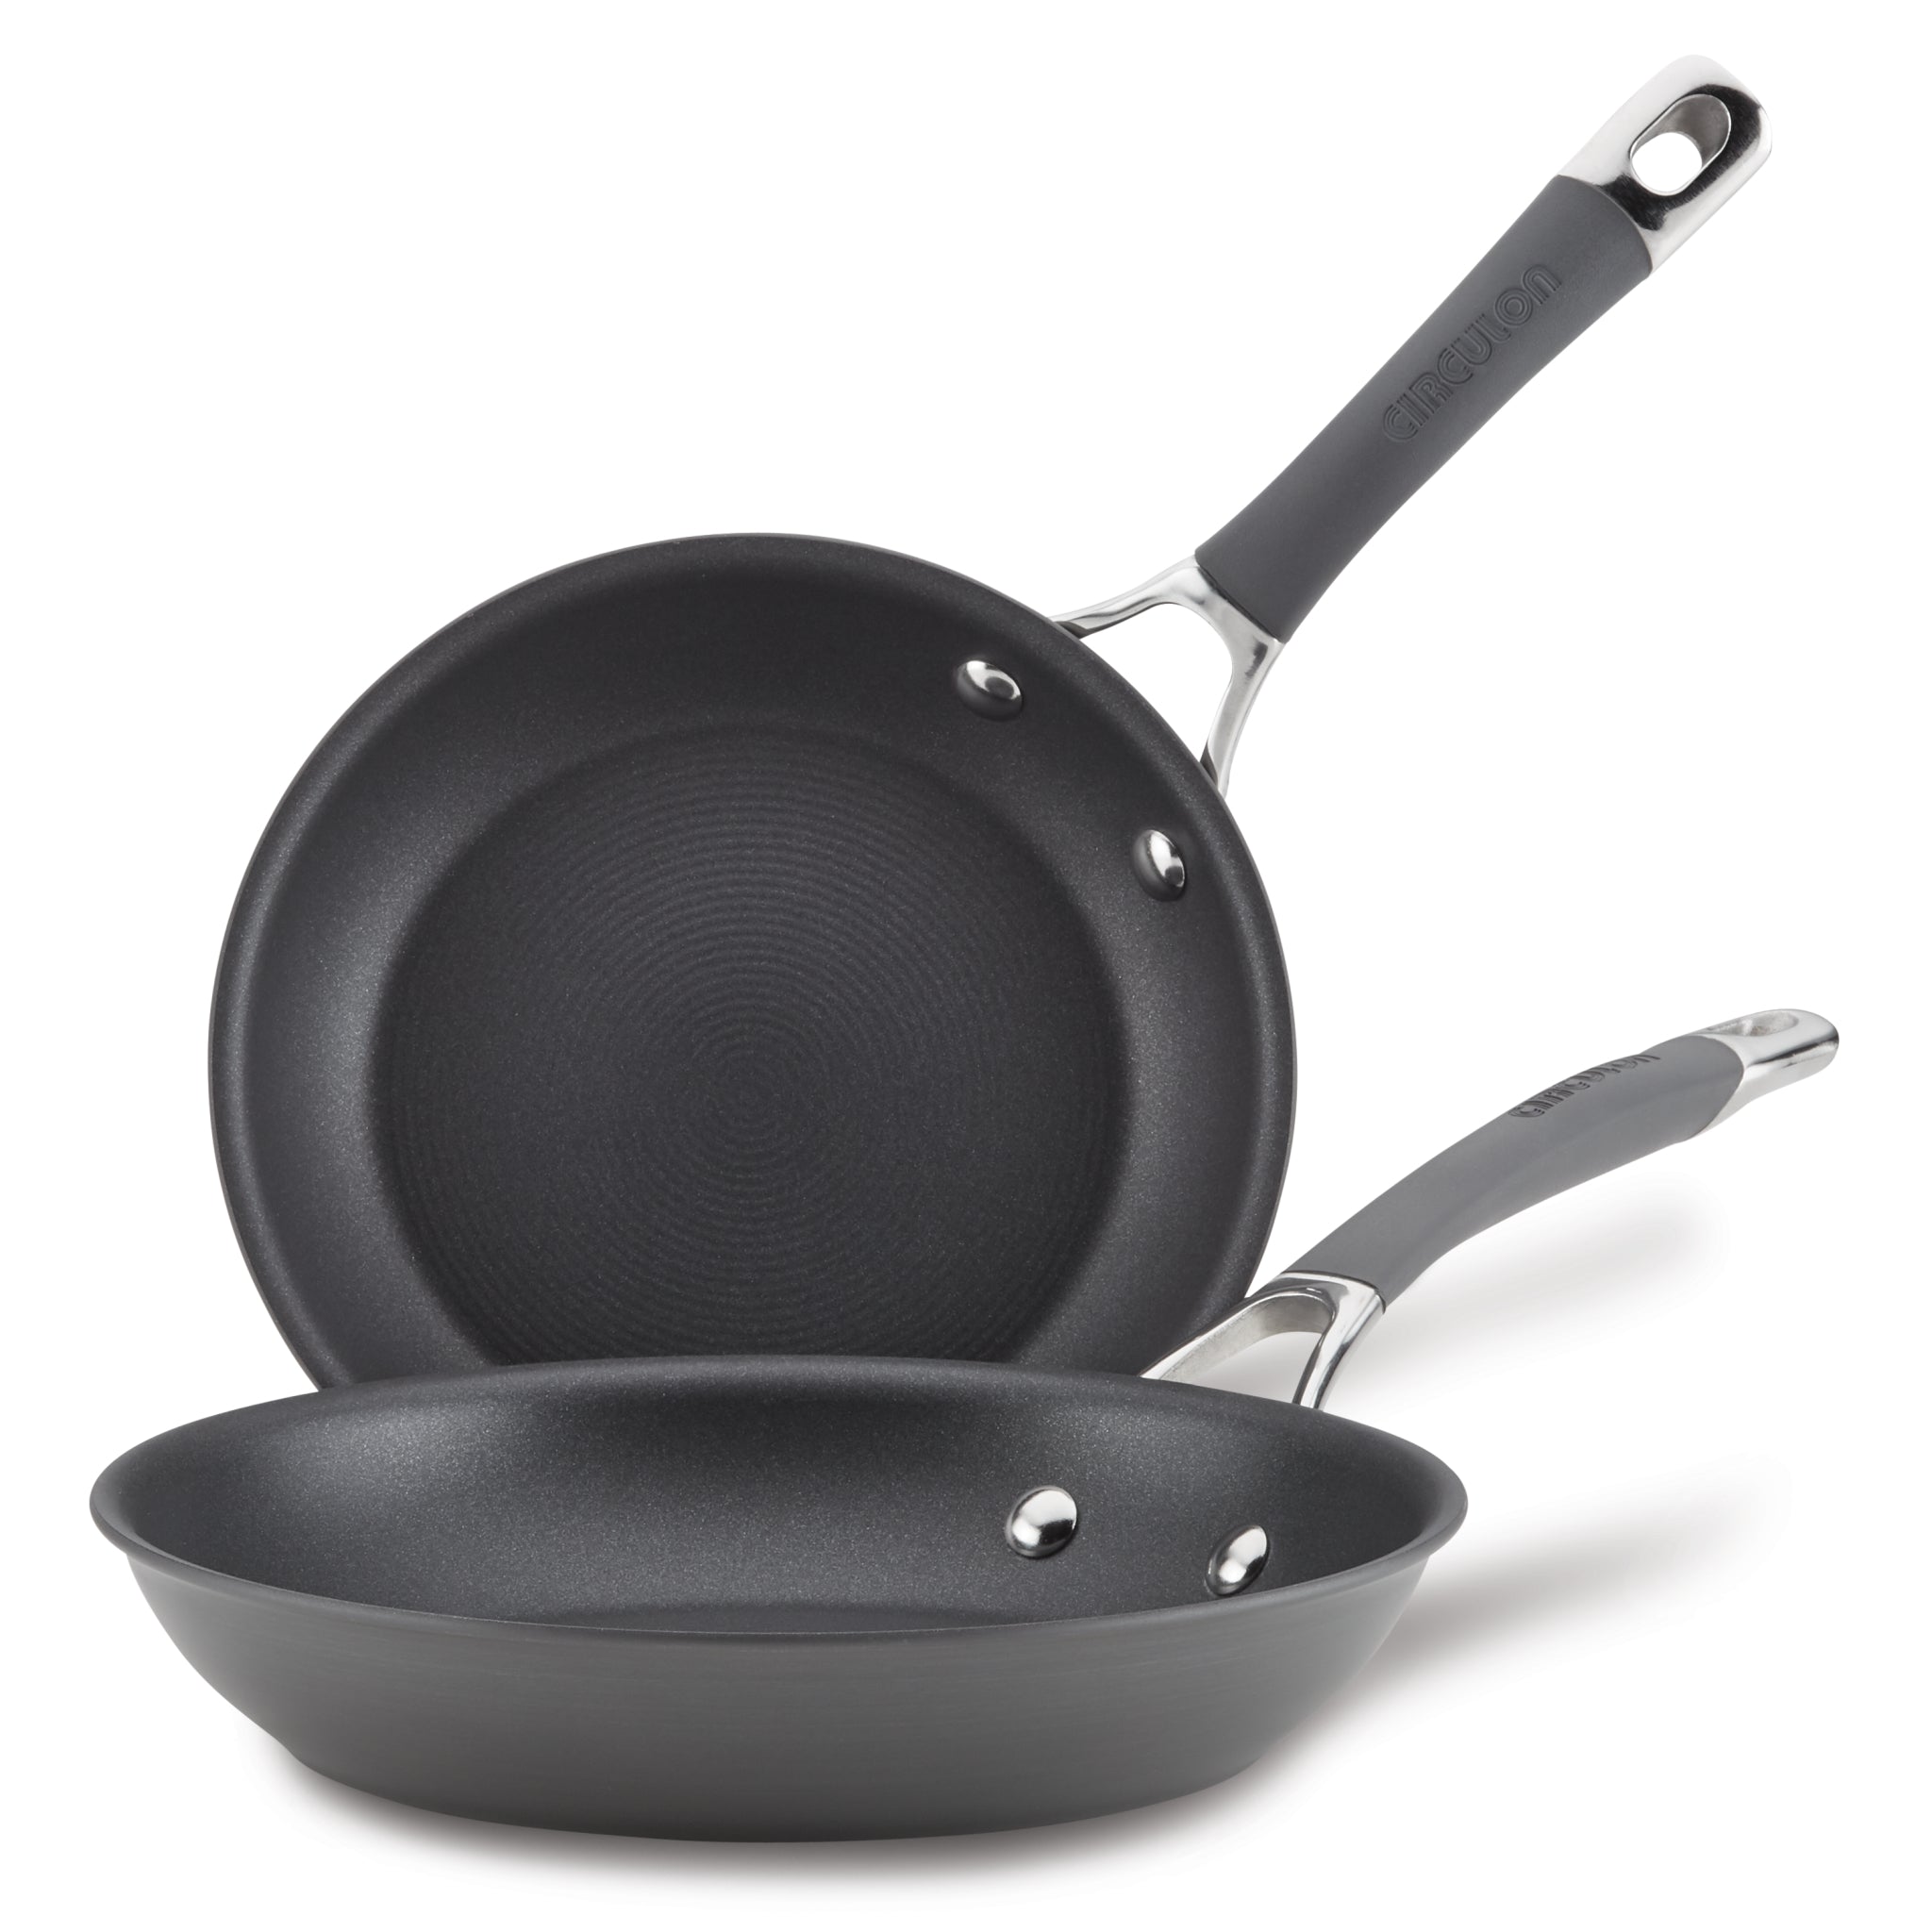 Premier™ Hard-Anodized Nonstick 11-Inch Square Griddle Pan